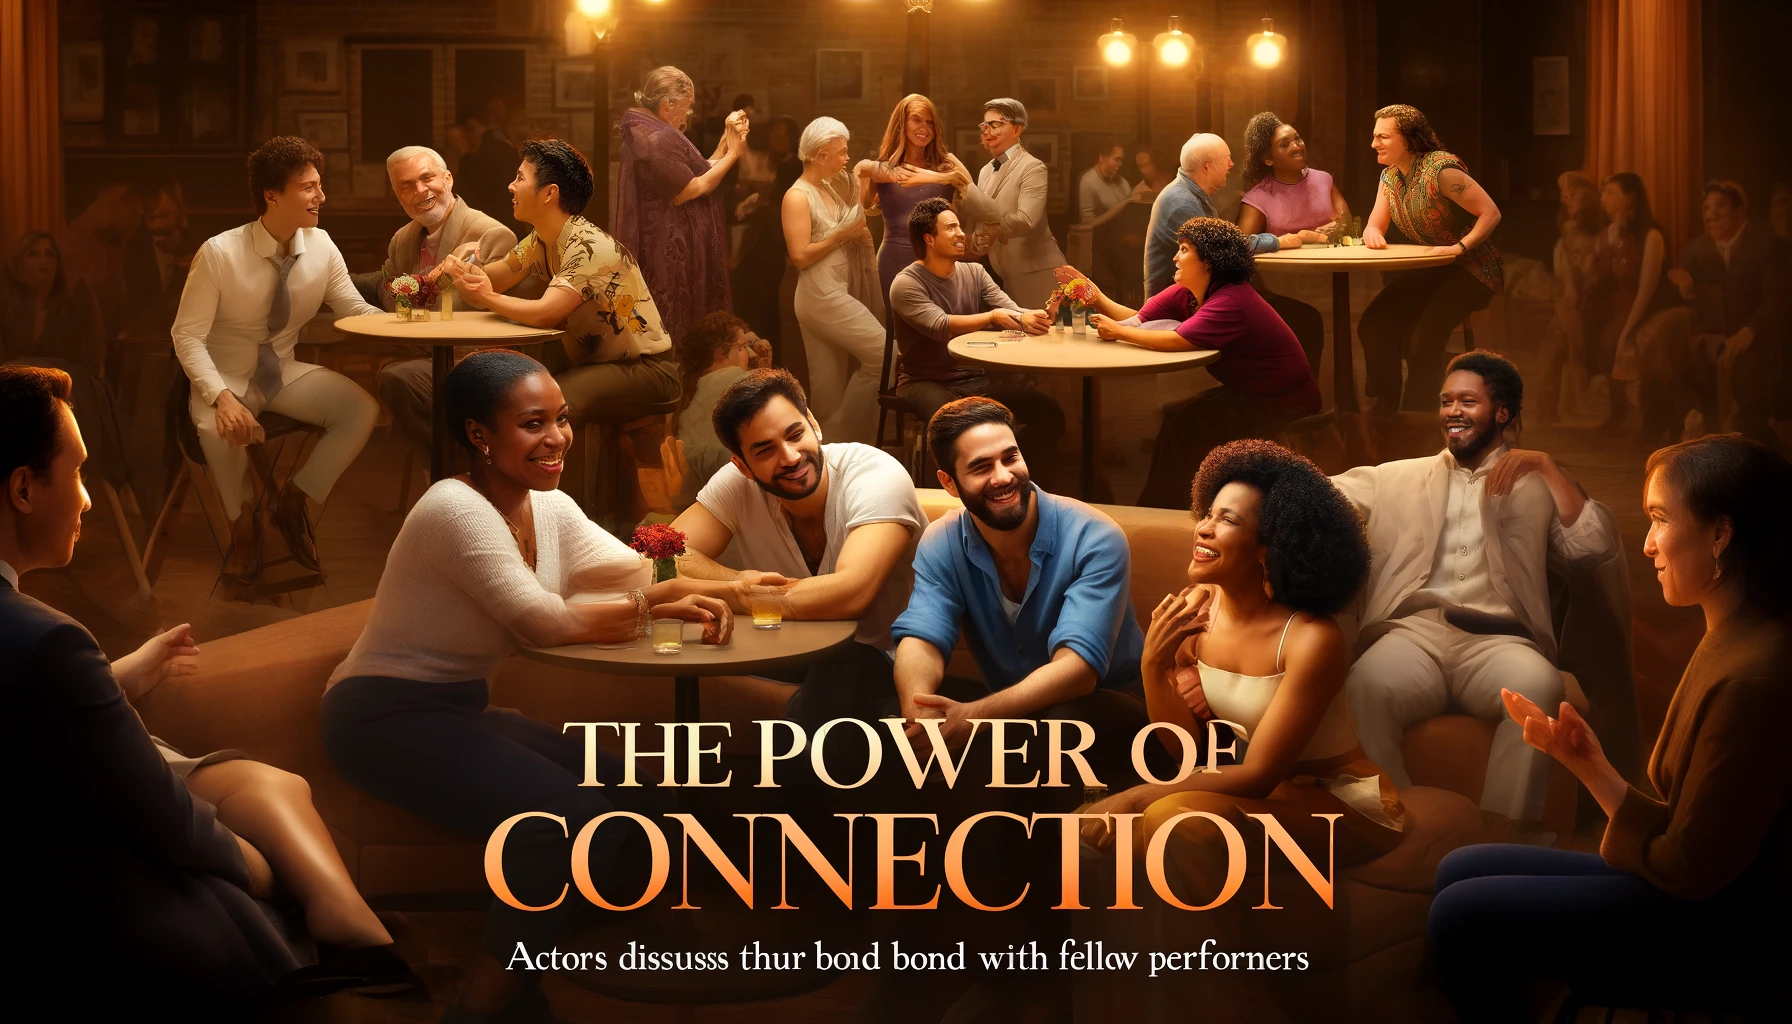 The Power of Connection: Actors Discuss Their Bond with Fellow Performers